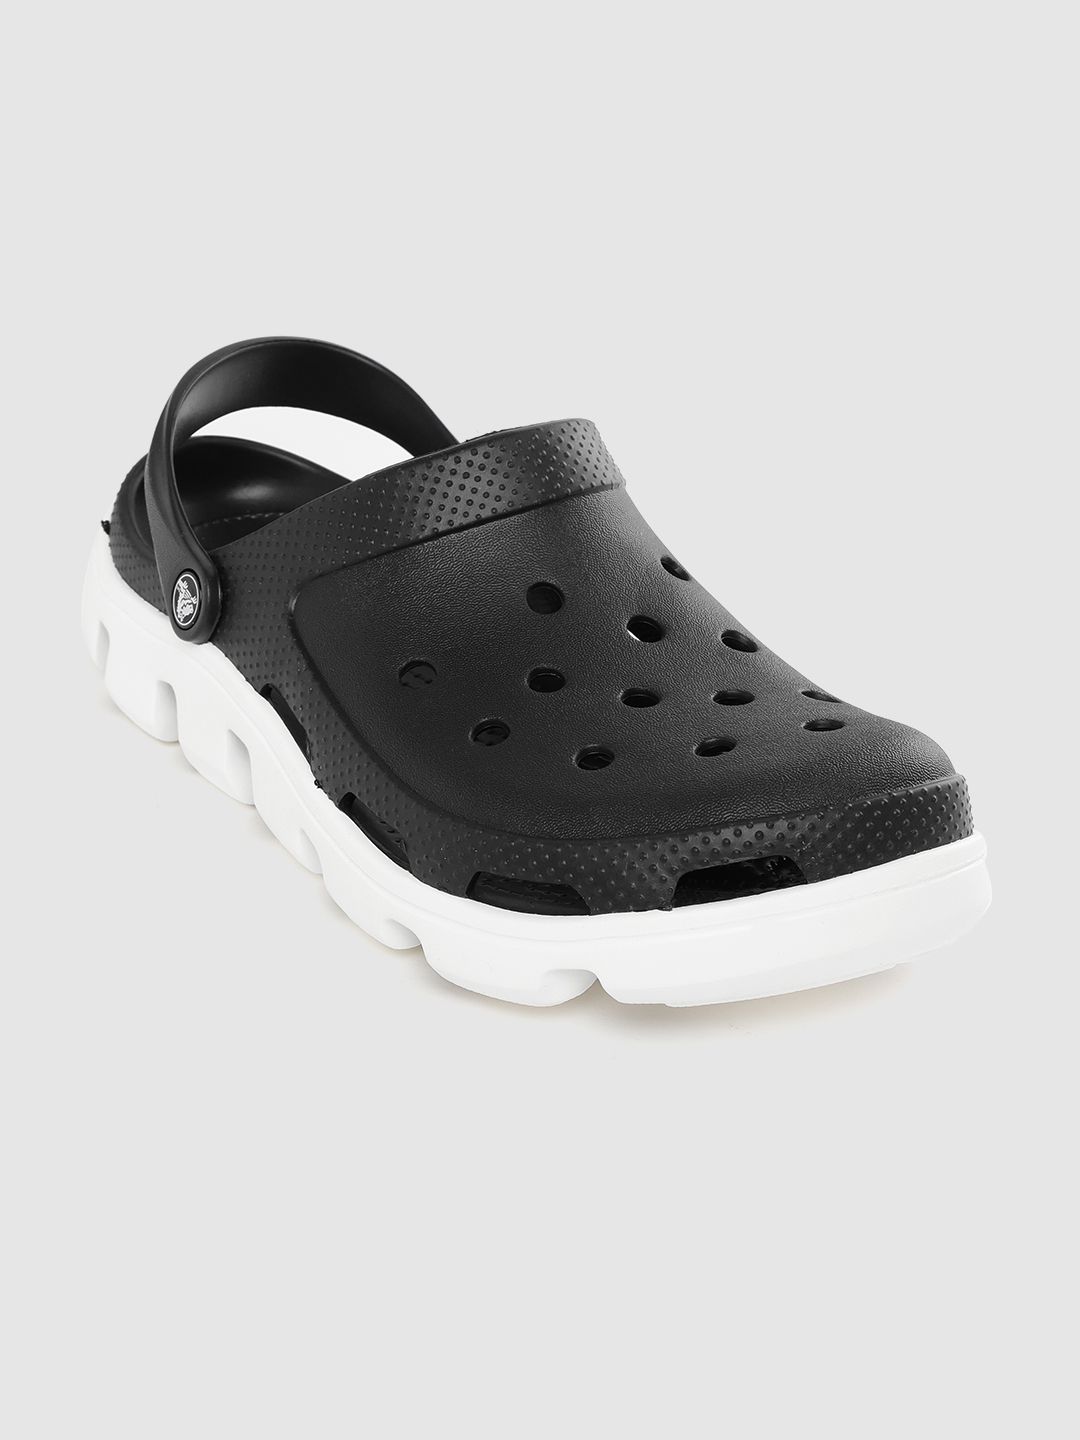 Crocs Unisex Black Solid Cut-Out Clogs Price in India